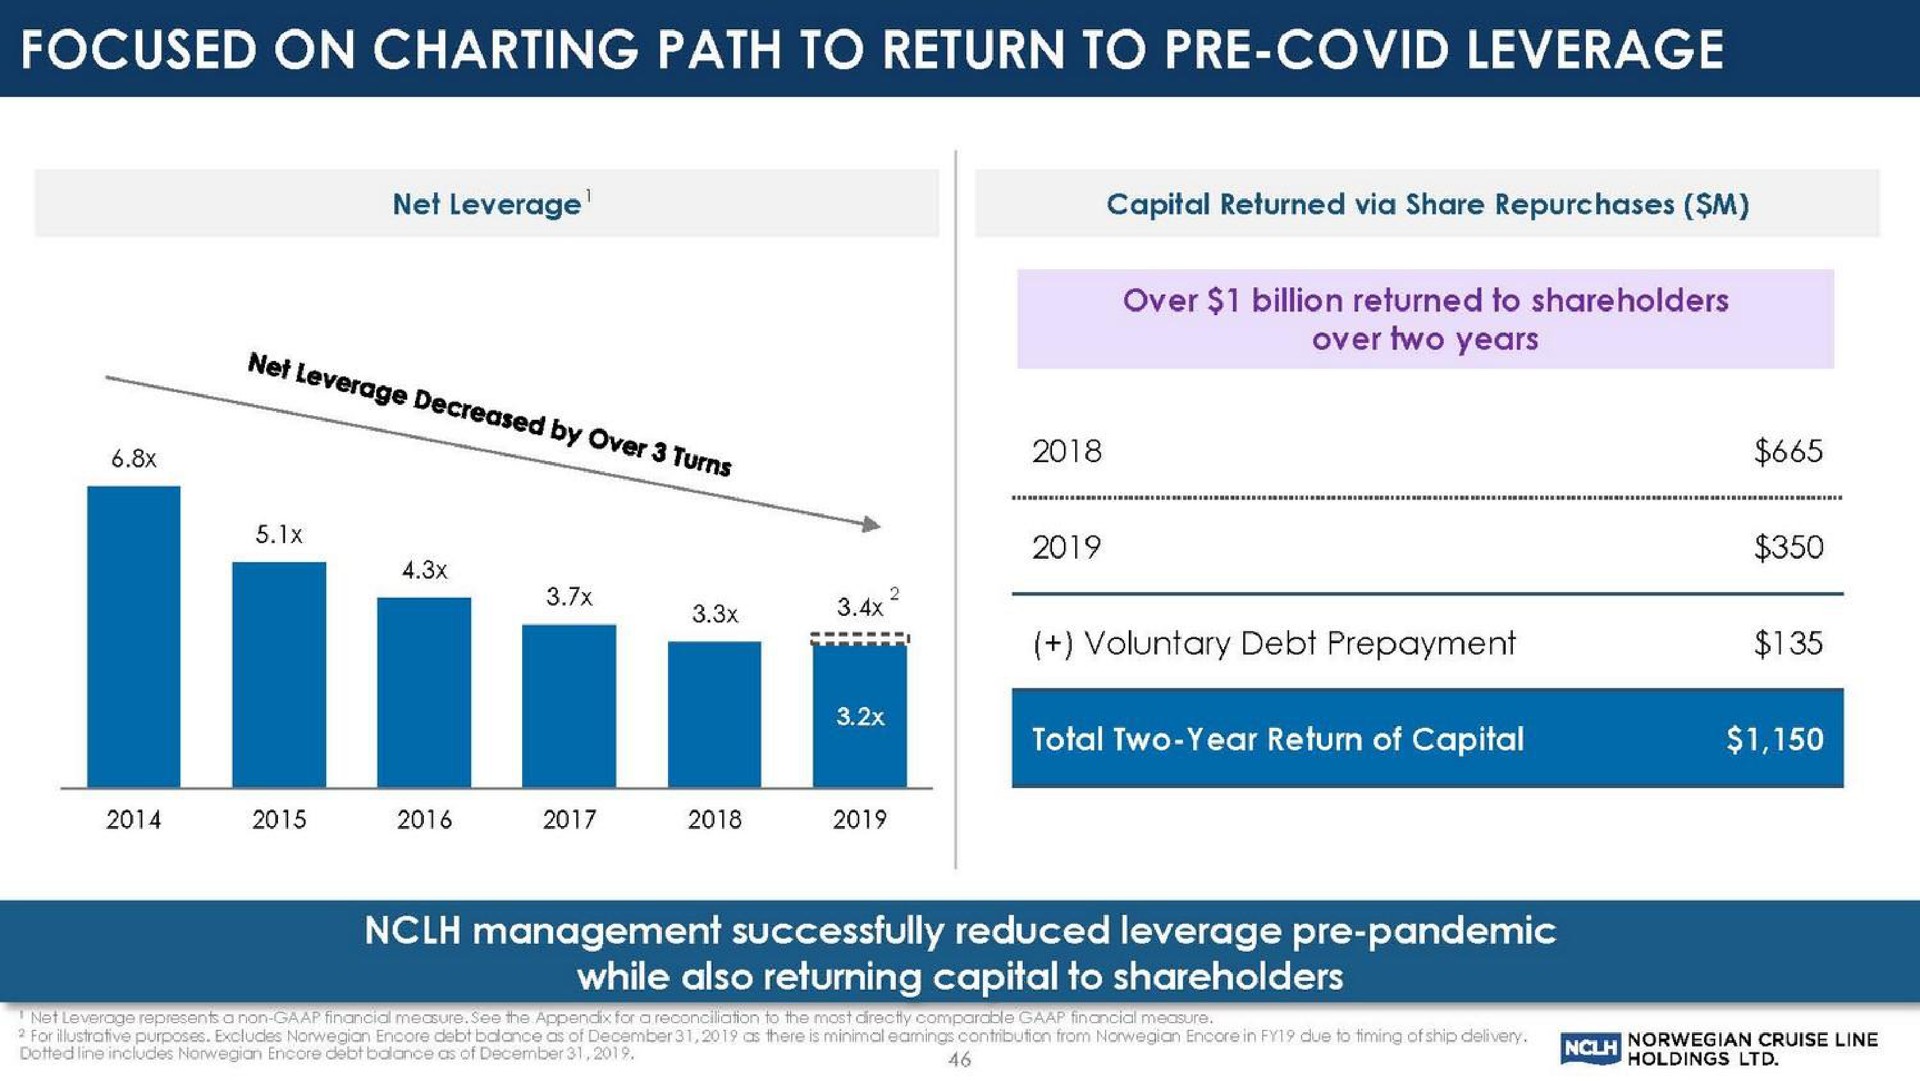 focused on charting path to return to covid leverage | Norwegian Cruise Line